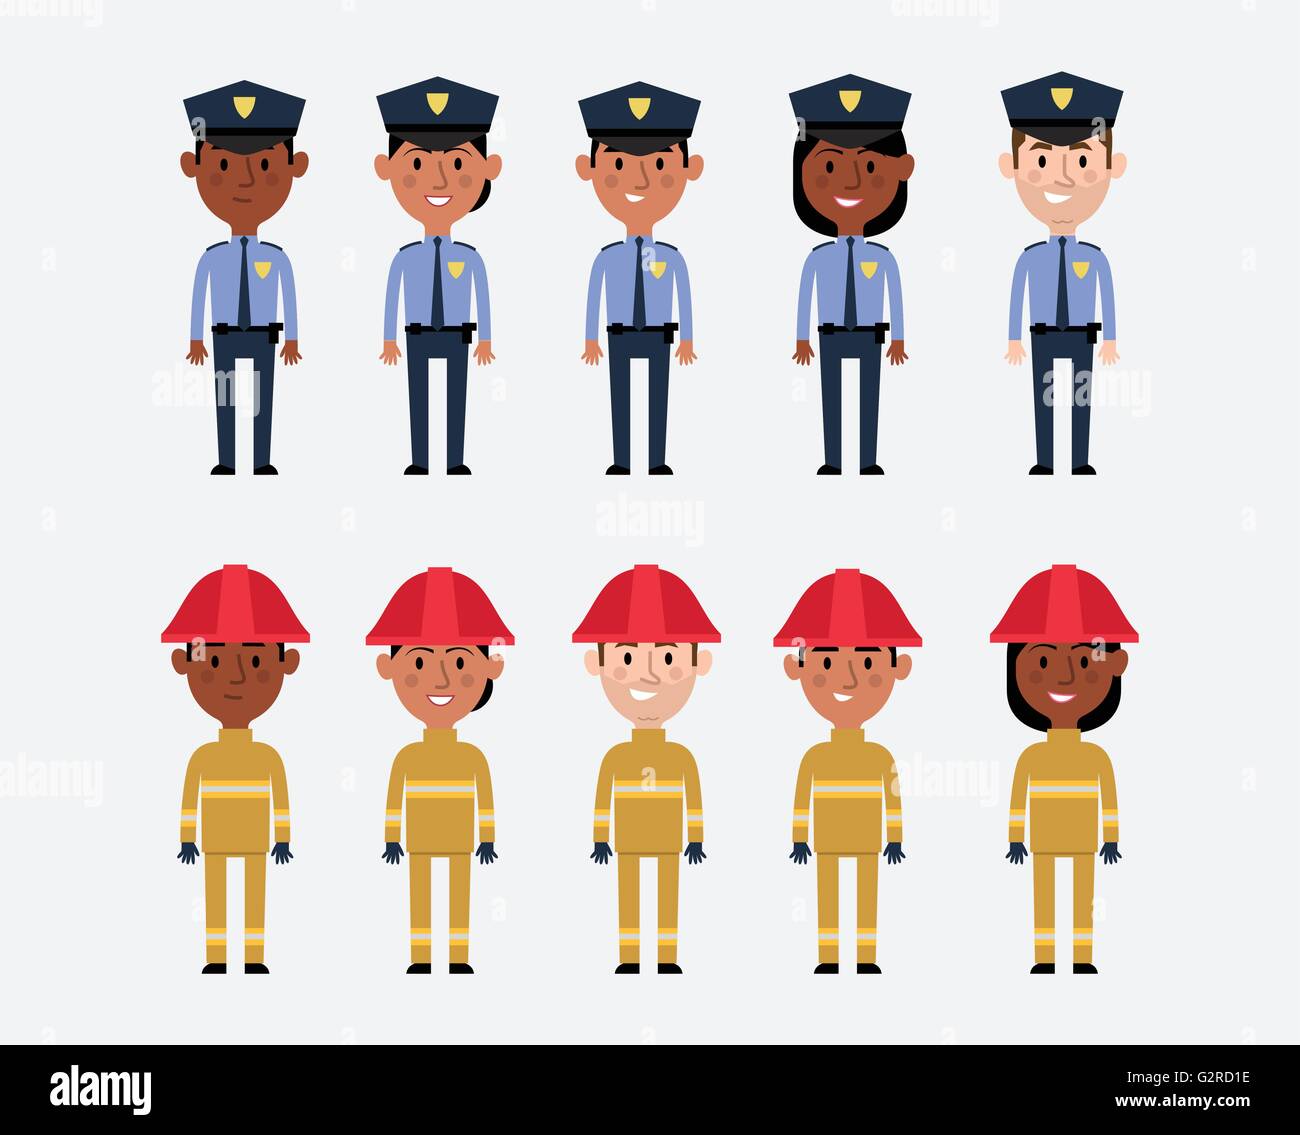 Illustrations Of Occupations In USA Police And Fire Services Stock Vector